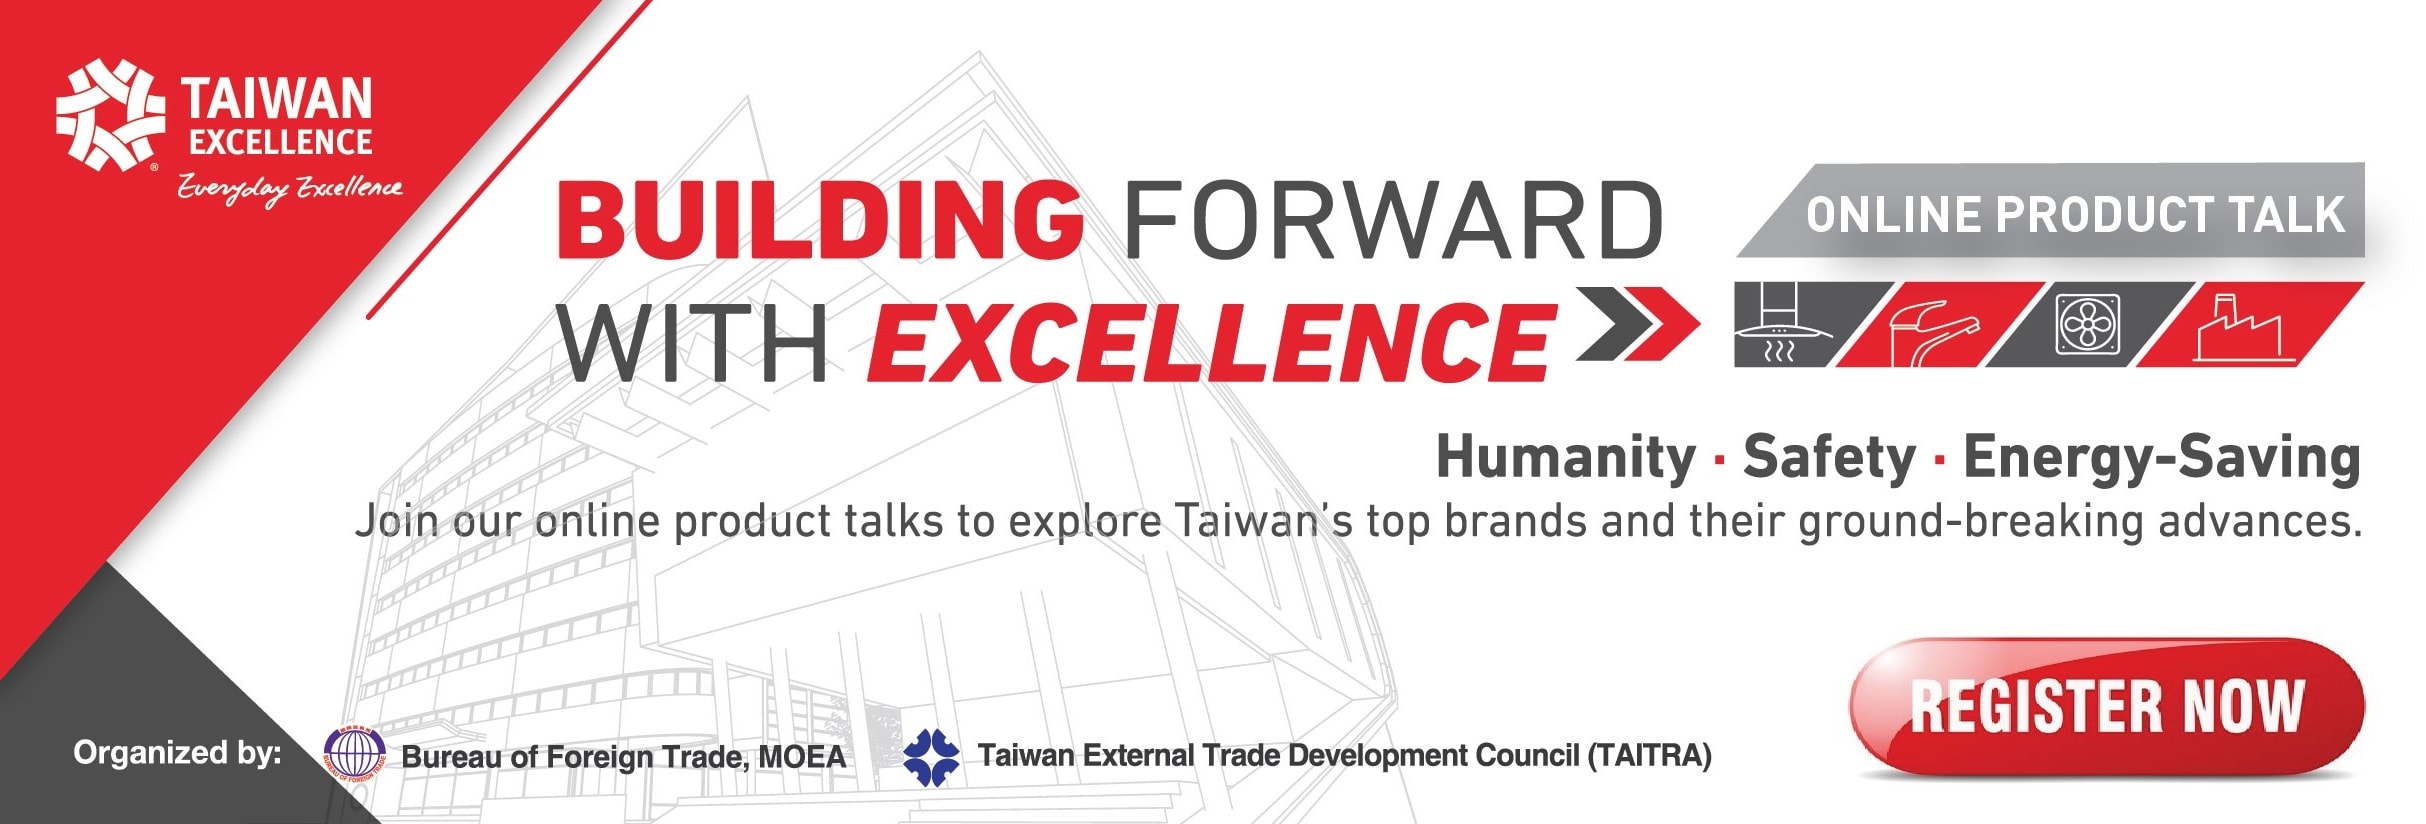 Taiwan Excellence Archidex Cover Image